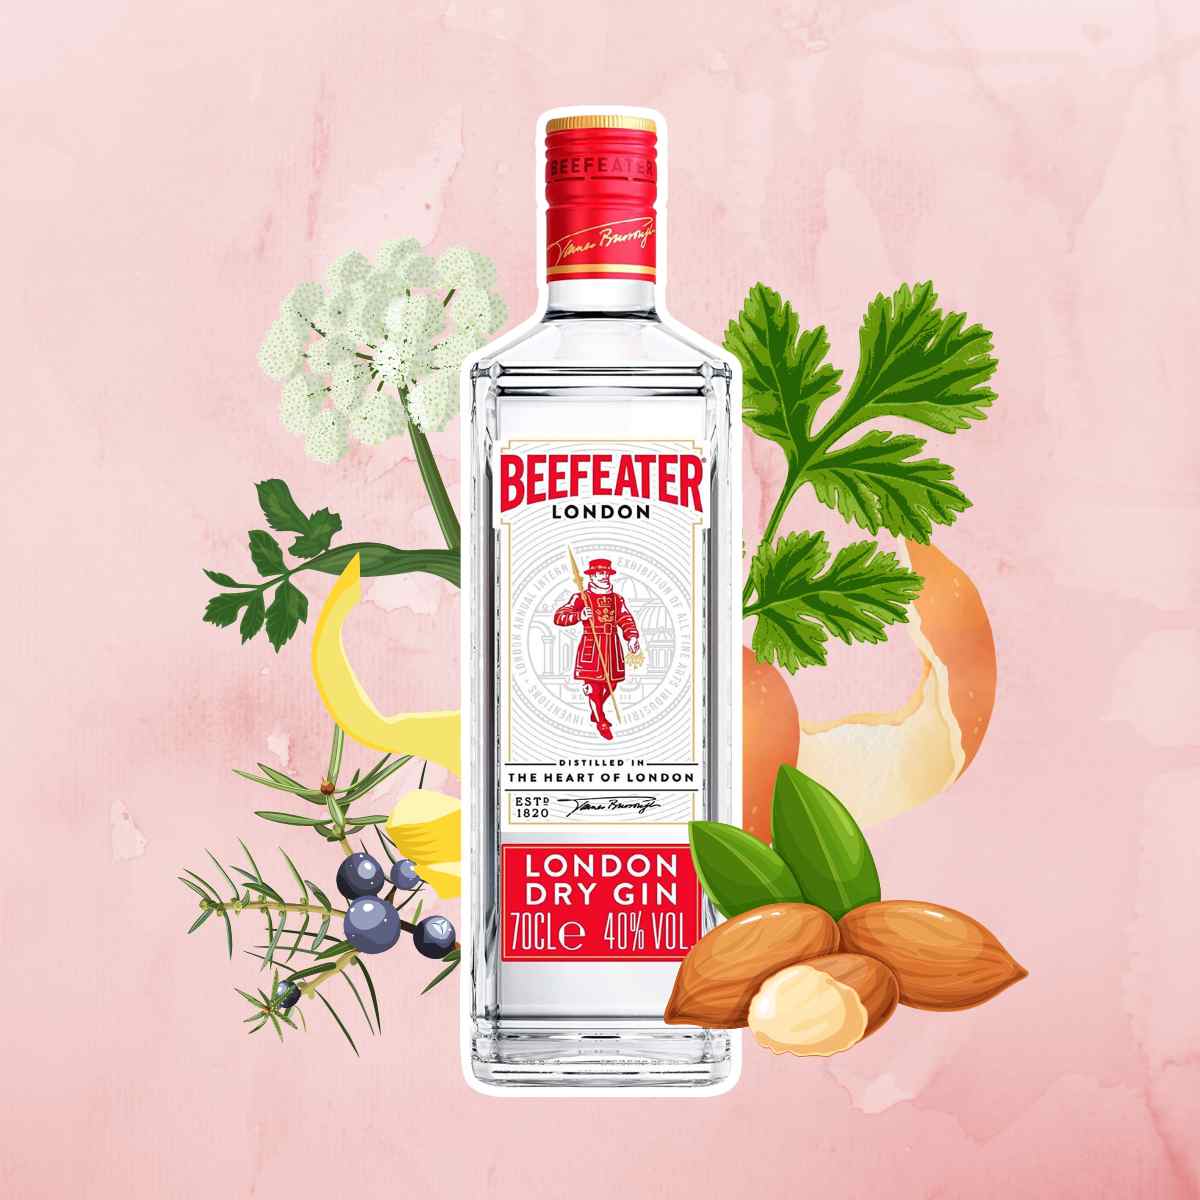 Beefeater London Dry Gin with botanical ingredients in the background